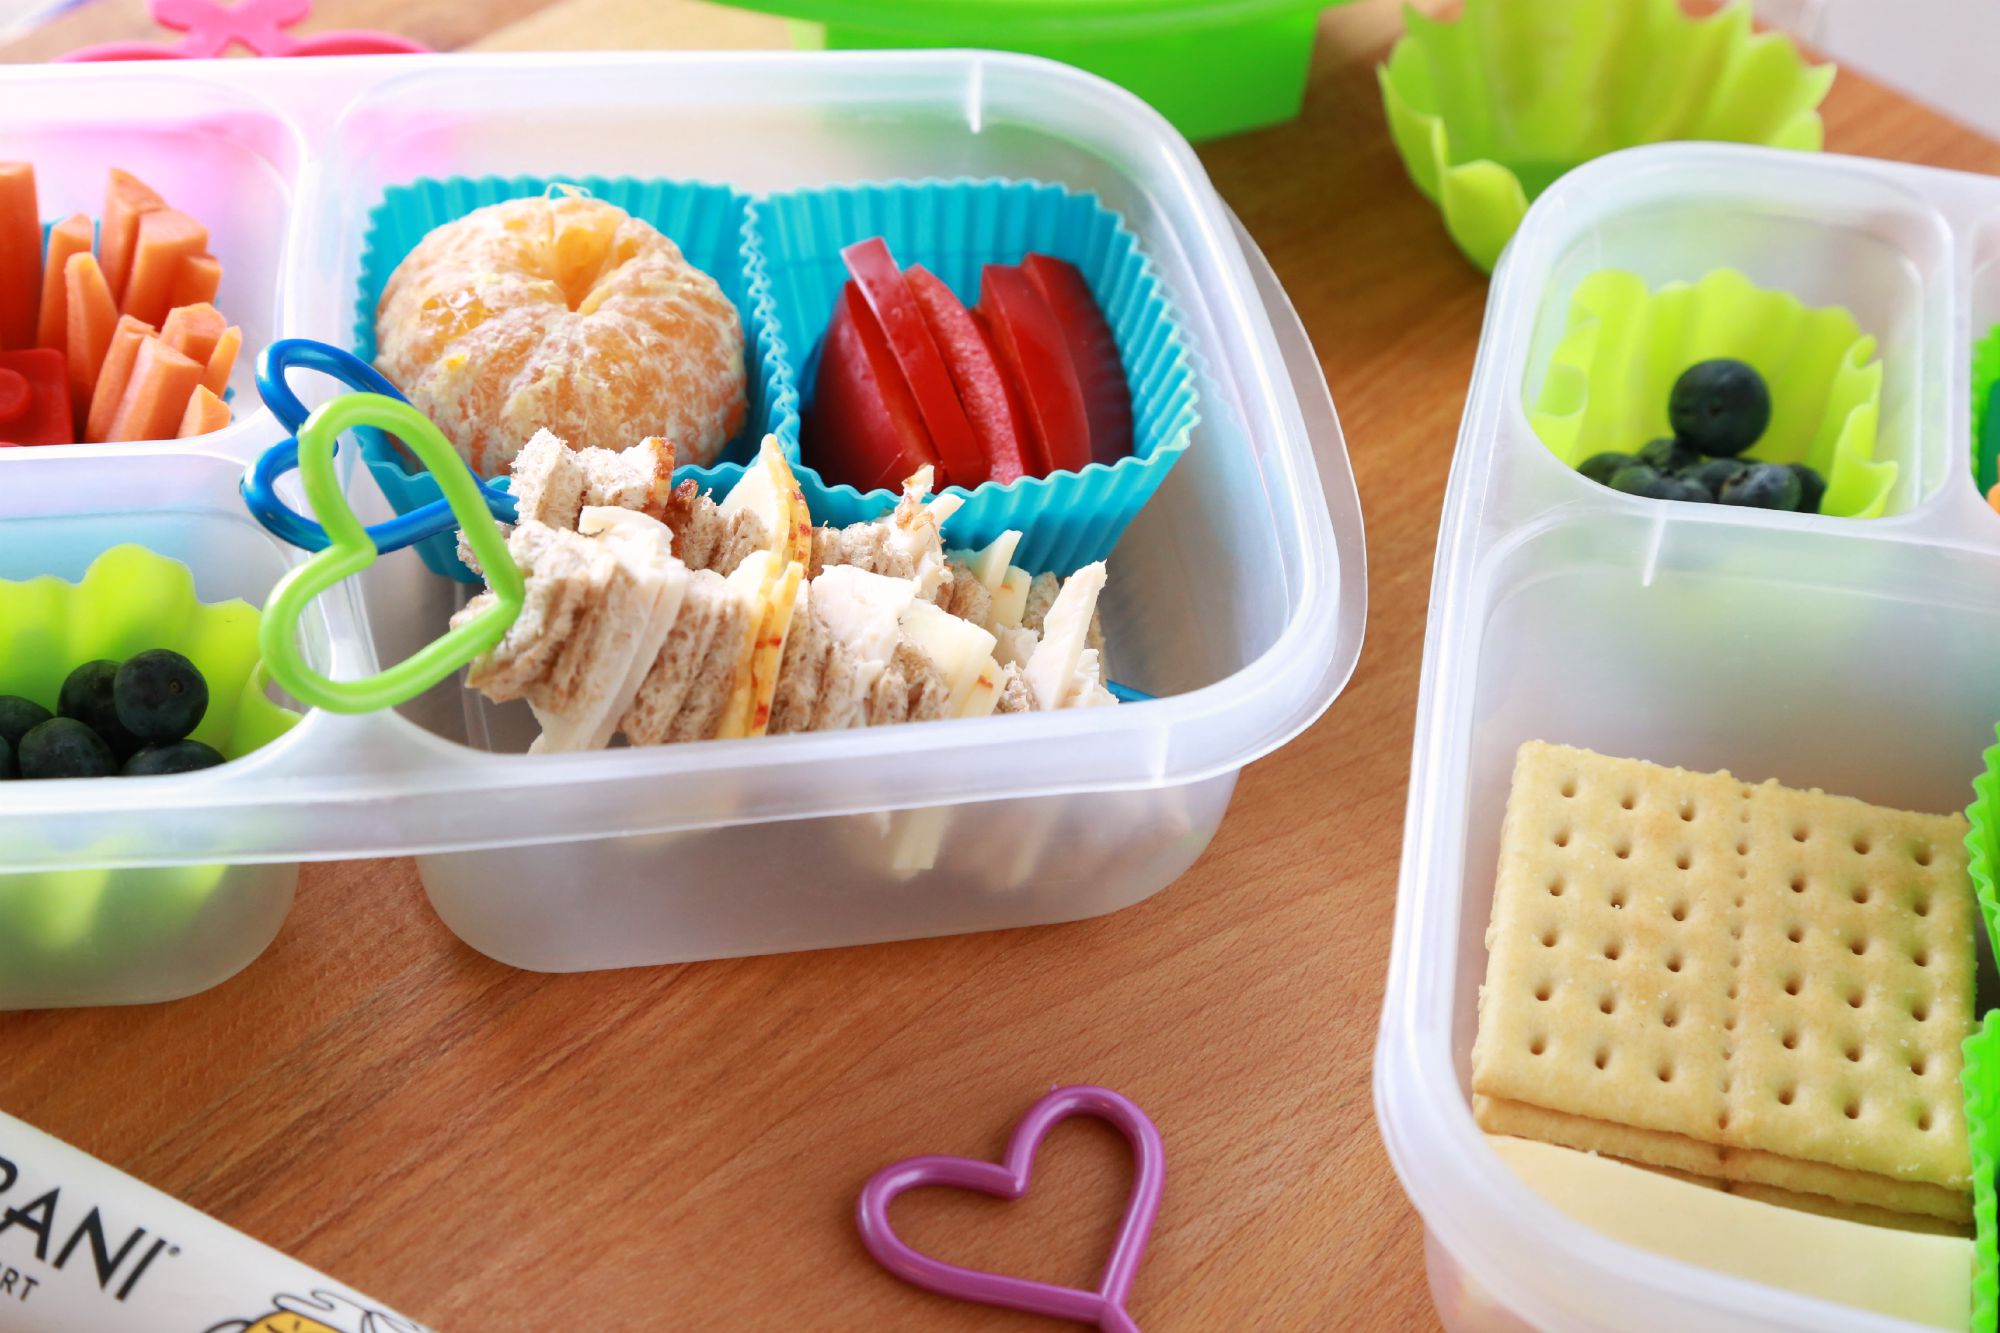 Looking to make bento lunches for your children? I'll tell you what you need to begin making fun, healthy lunches for your children. See my full list of bento lunch supplies that make it easier.